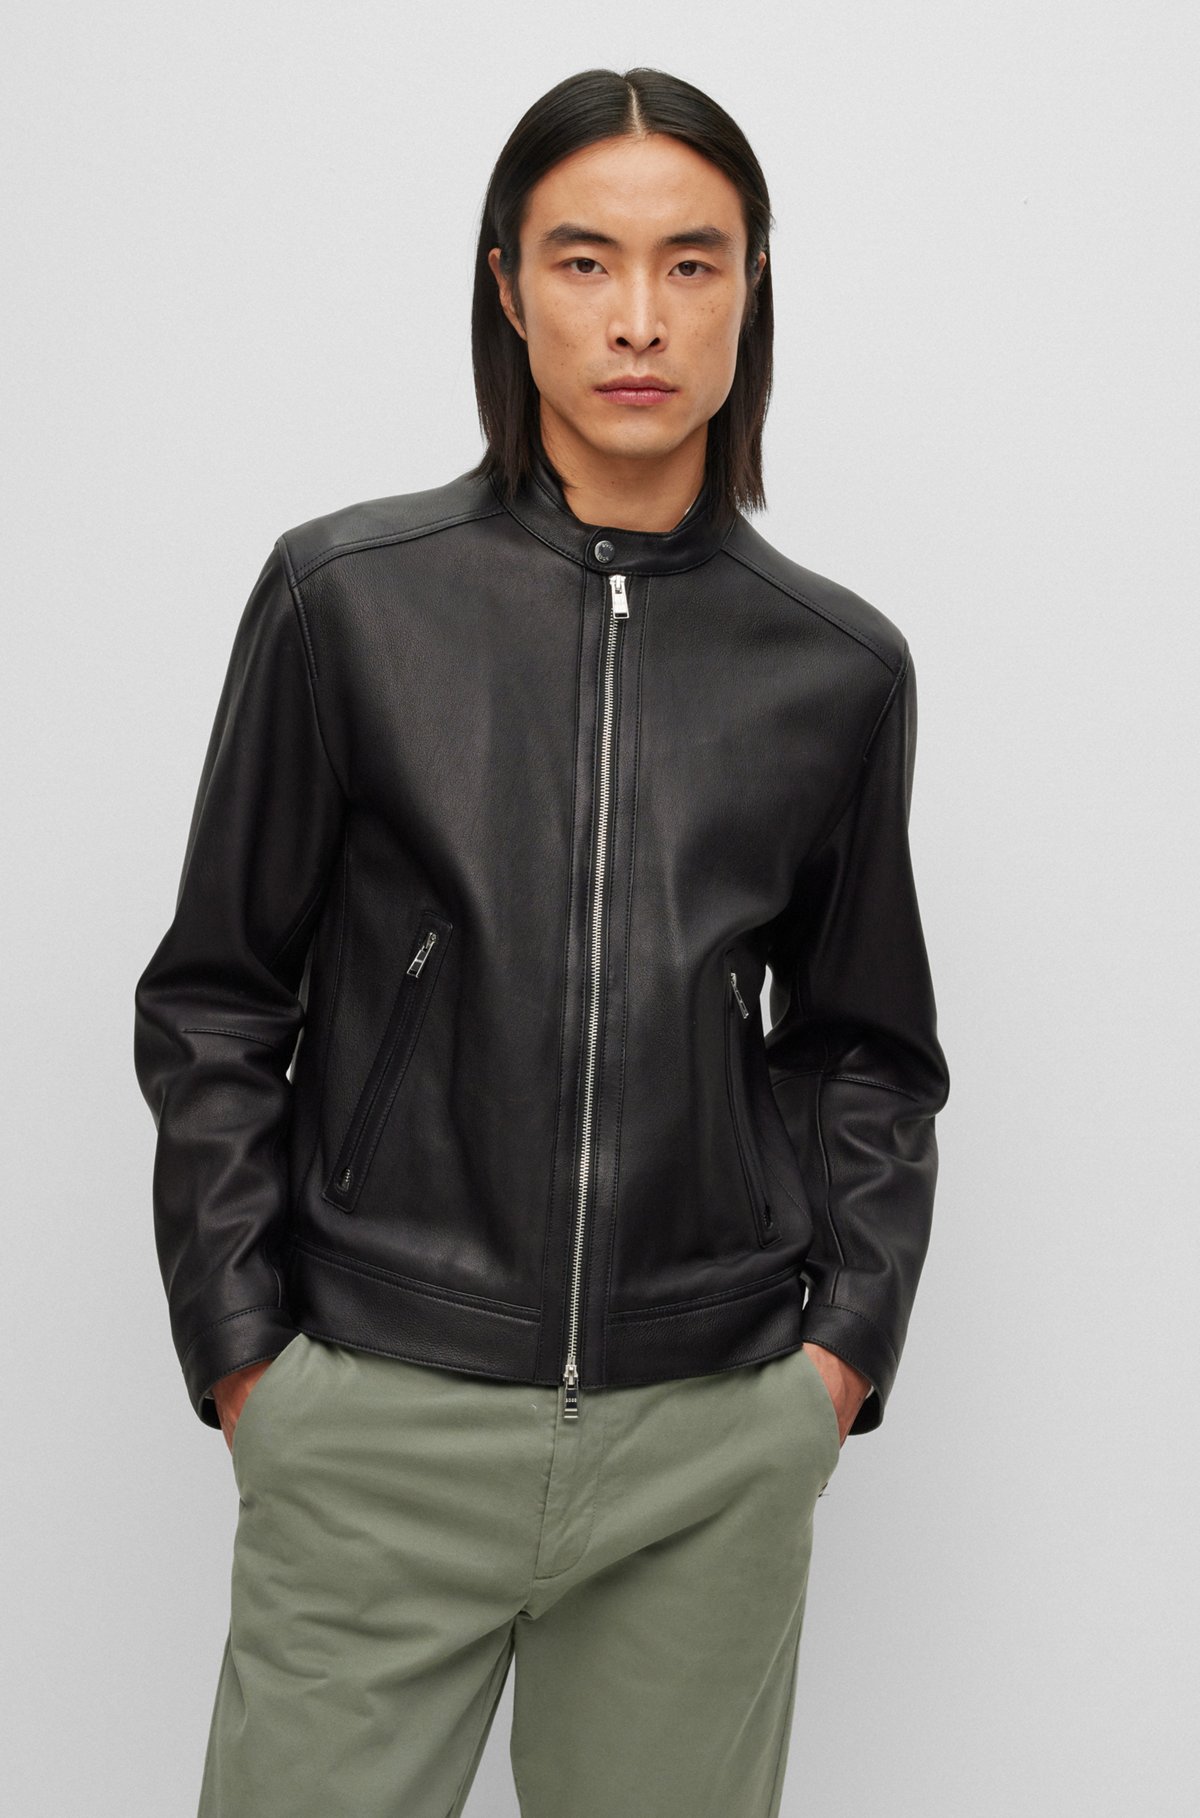 BOSS - Regular-fit jacket in lamb leather with stand collar